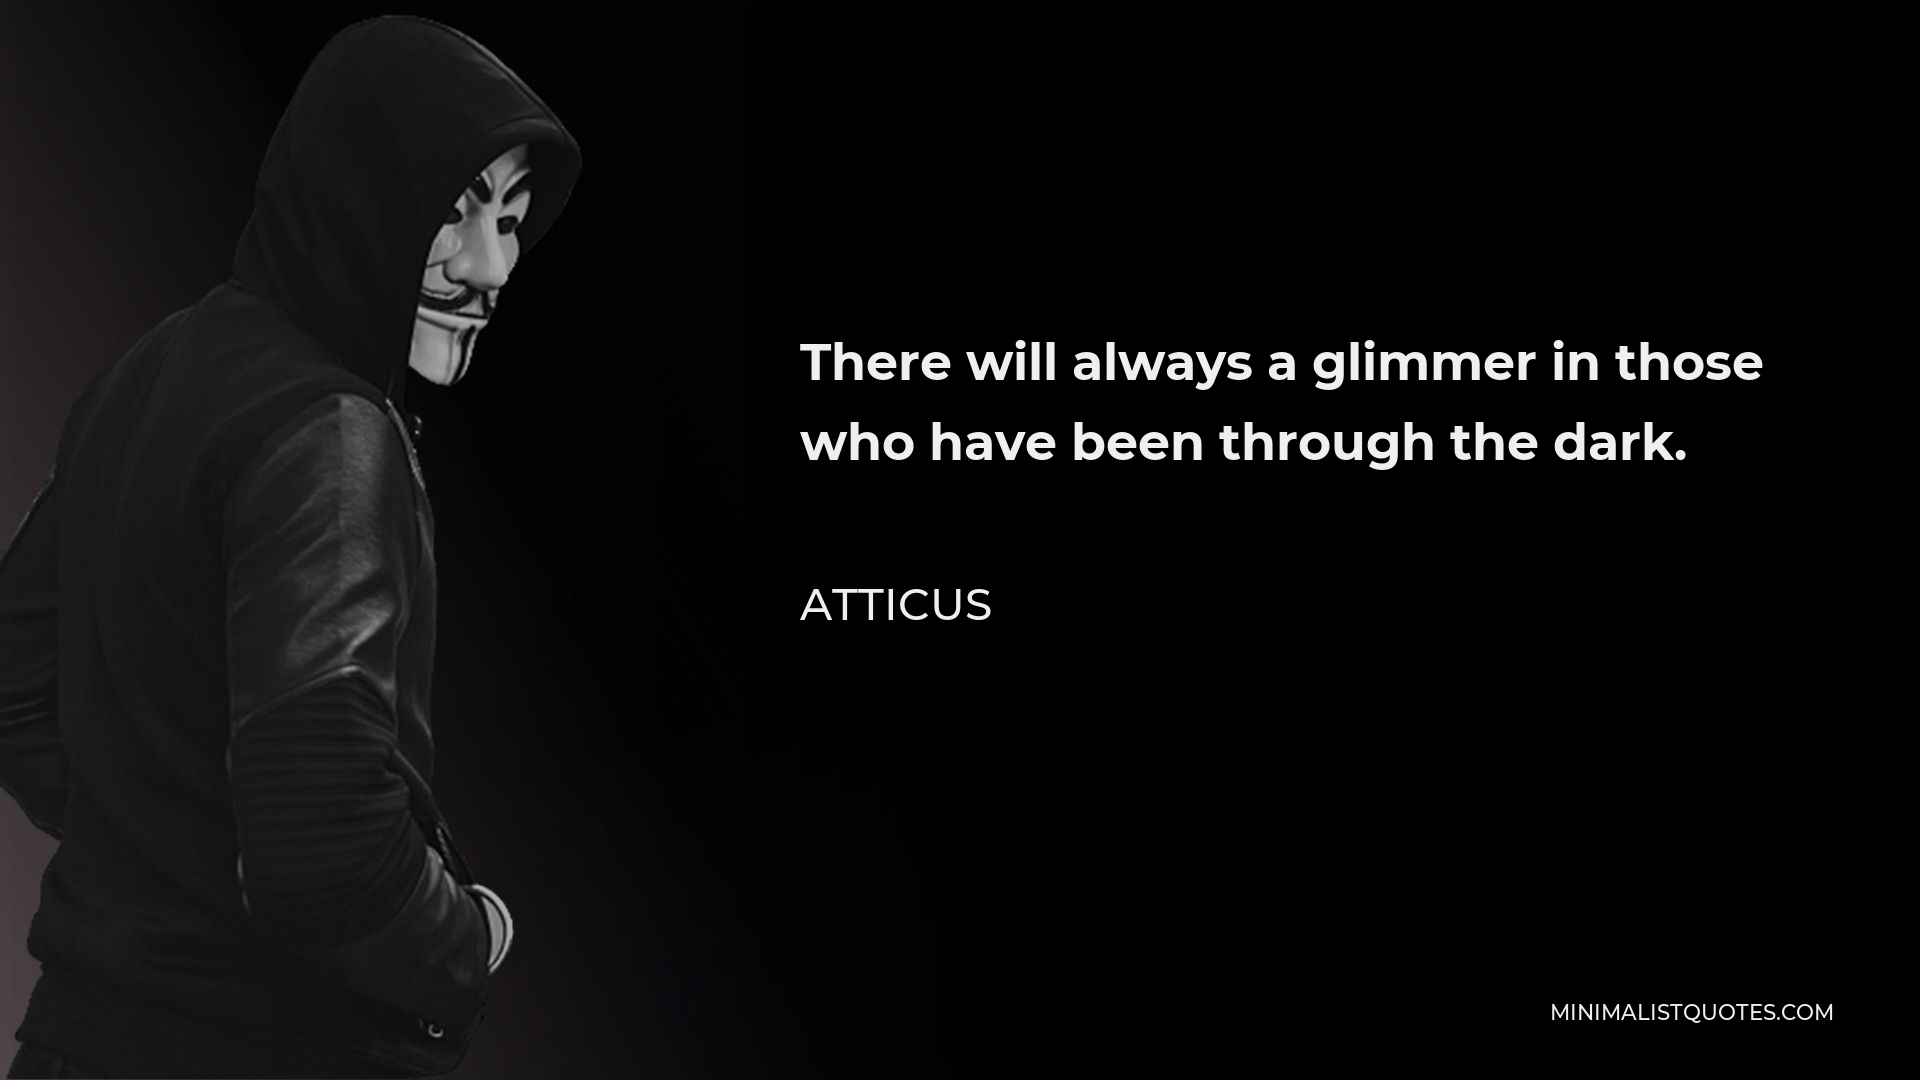 Atticus Quote - There will always a glimmer in those who have been through the dark.